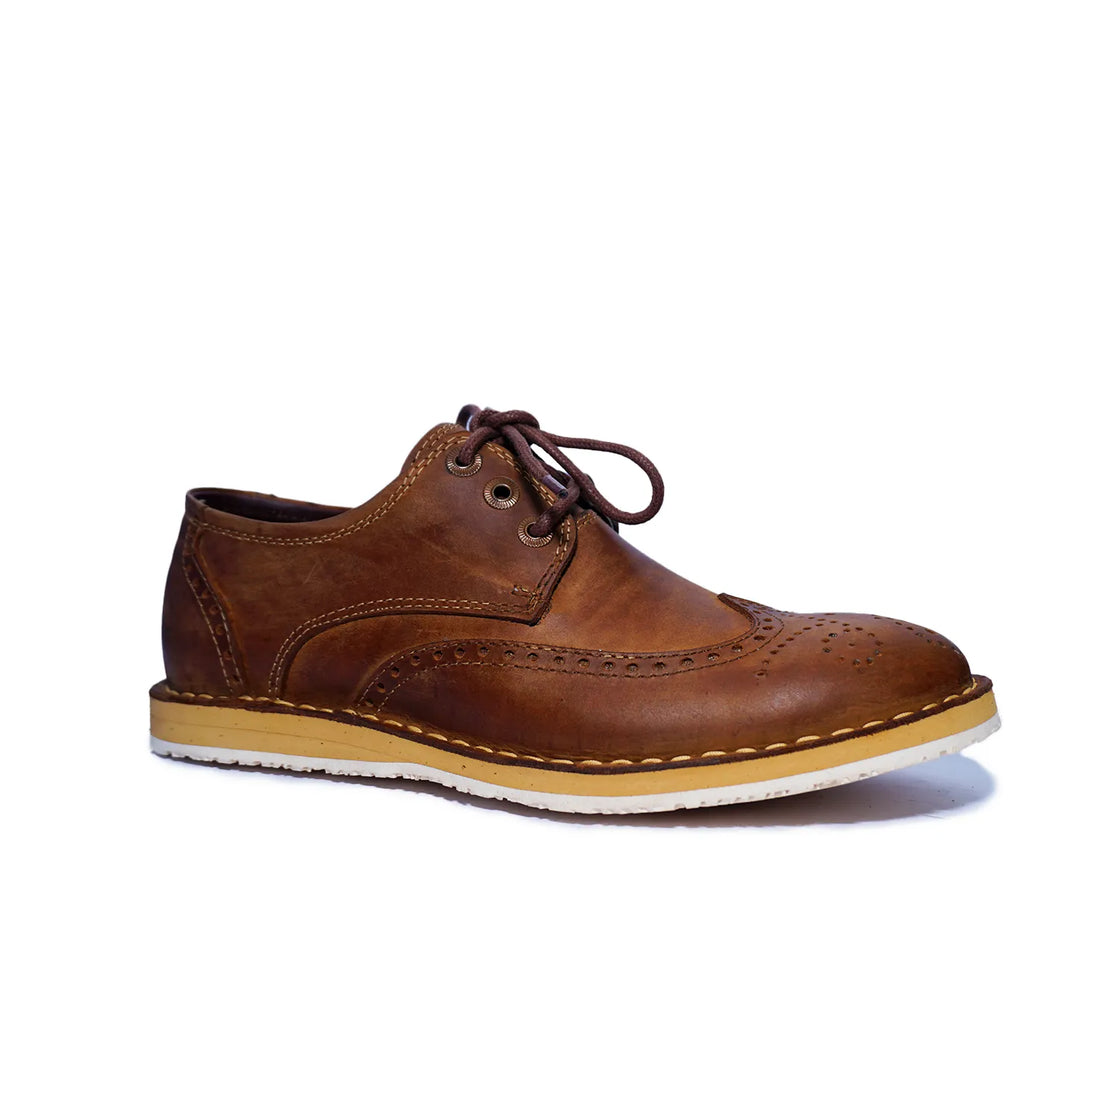 Stellar Brown Leather Shoes